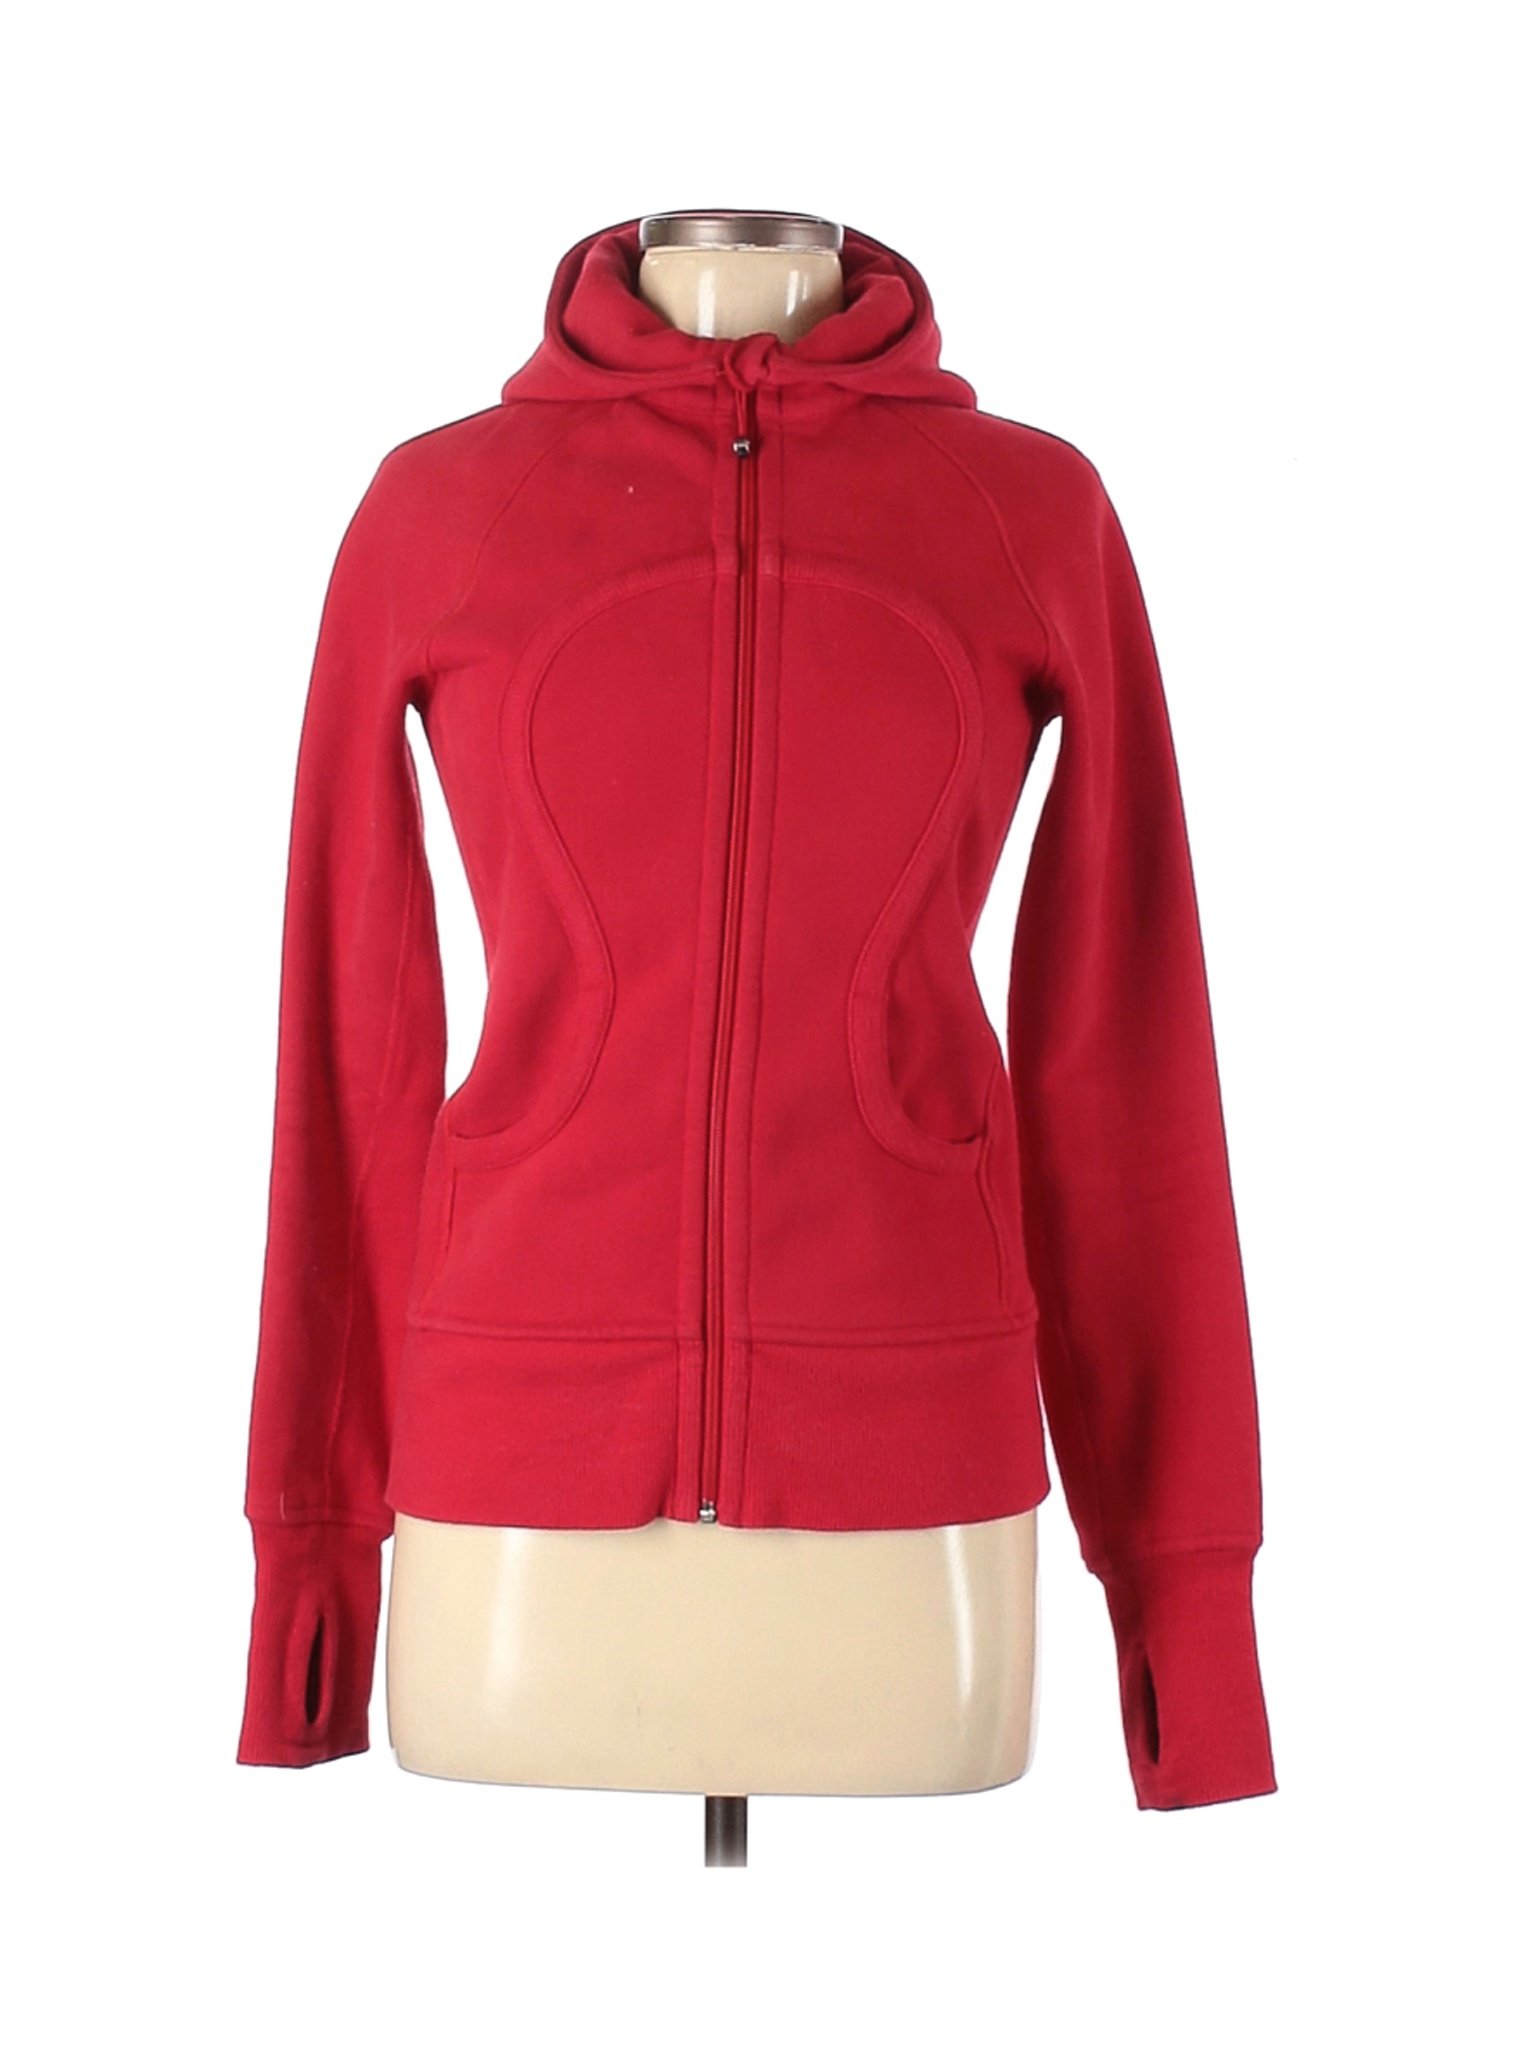 Your lululemon shopping guide - what zip up sweatshirt is best?